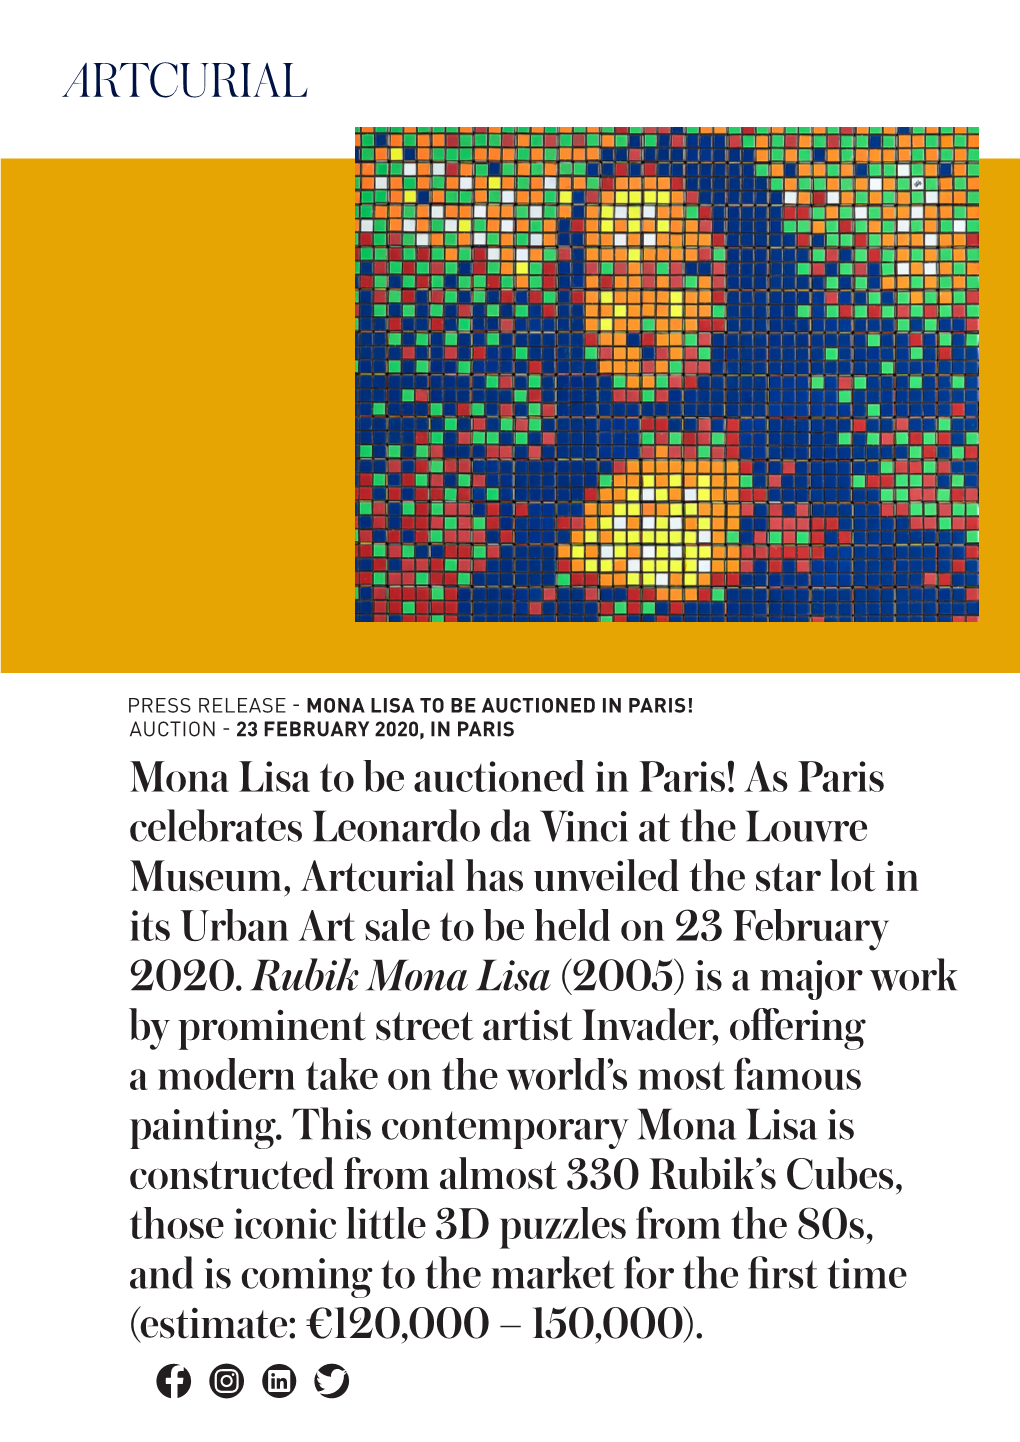 Press Release: Mona Lisa to Be Auctioned Paris | 23.02.2020